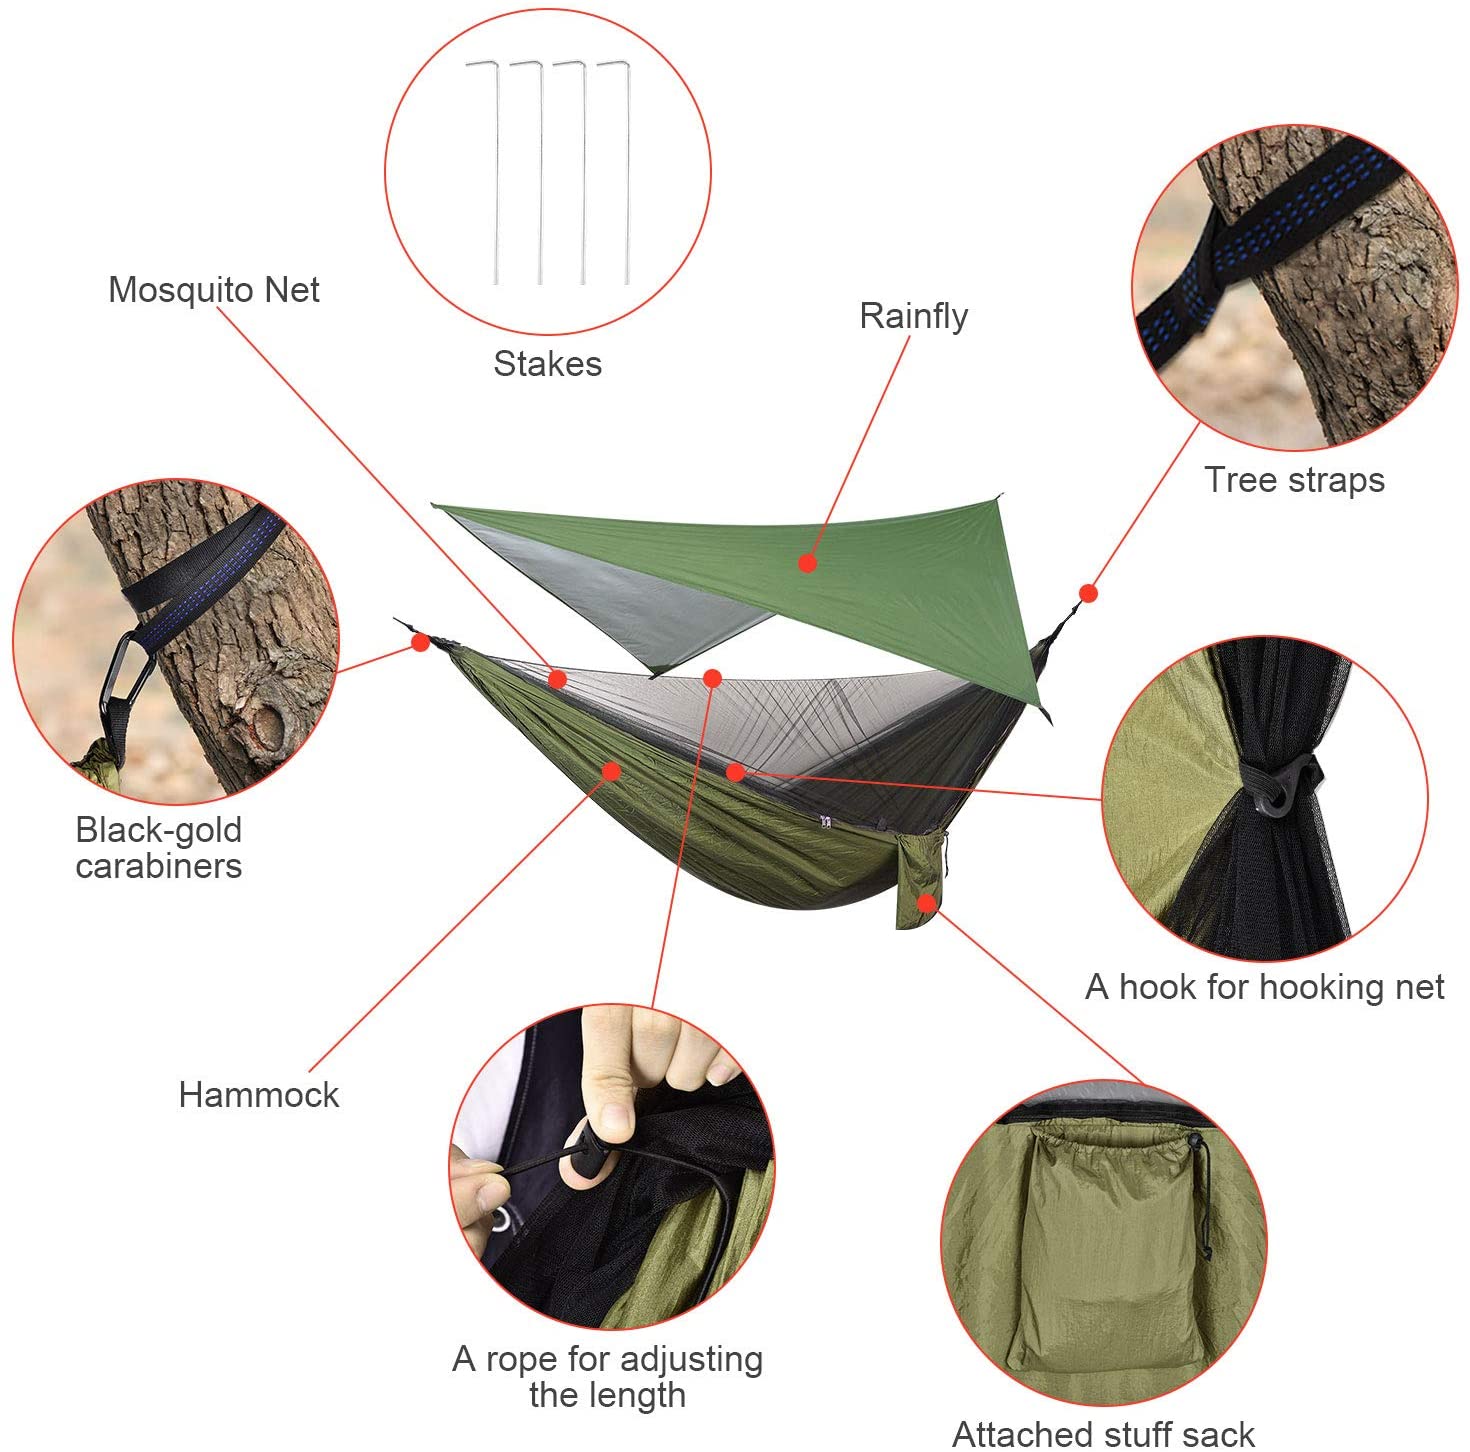 Camping Hammock with PU Rain Fly Tarp and Mosquito Net Tent Tree Straps, Portable Single Double Nylon Parachute Hammock Rainfly Set for Backpacking Hiking Travel Yard Outdoor Activities Army green